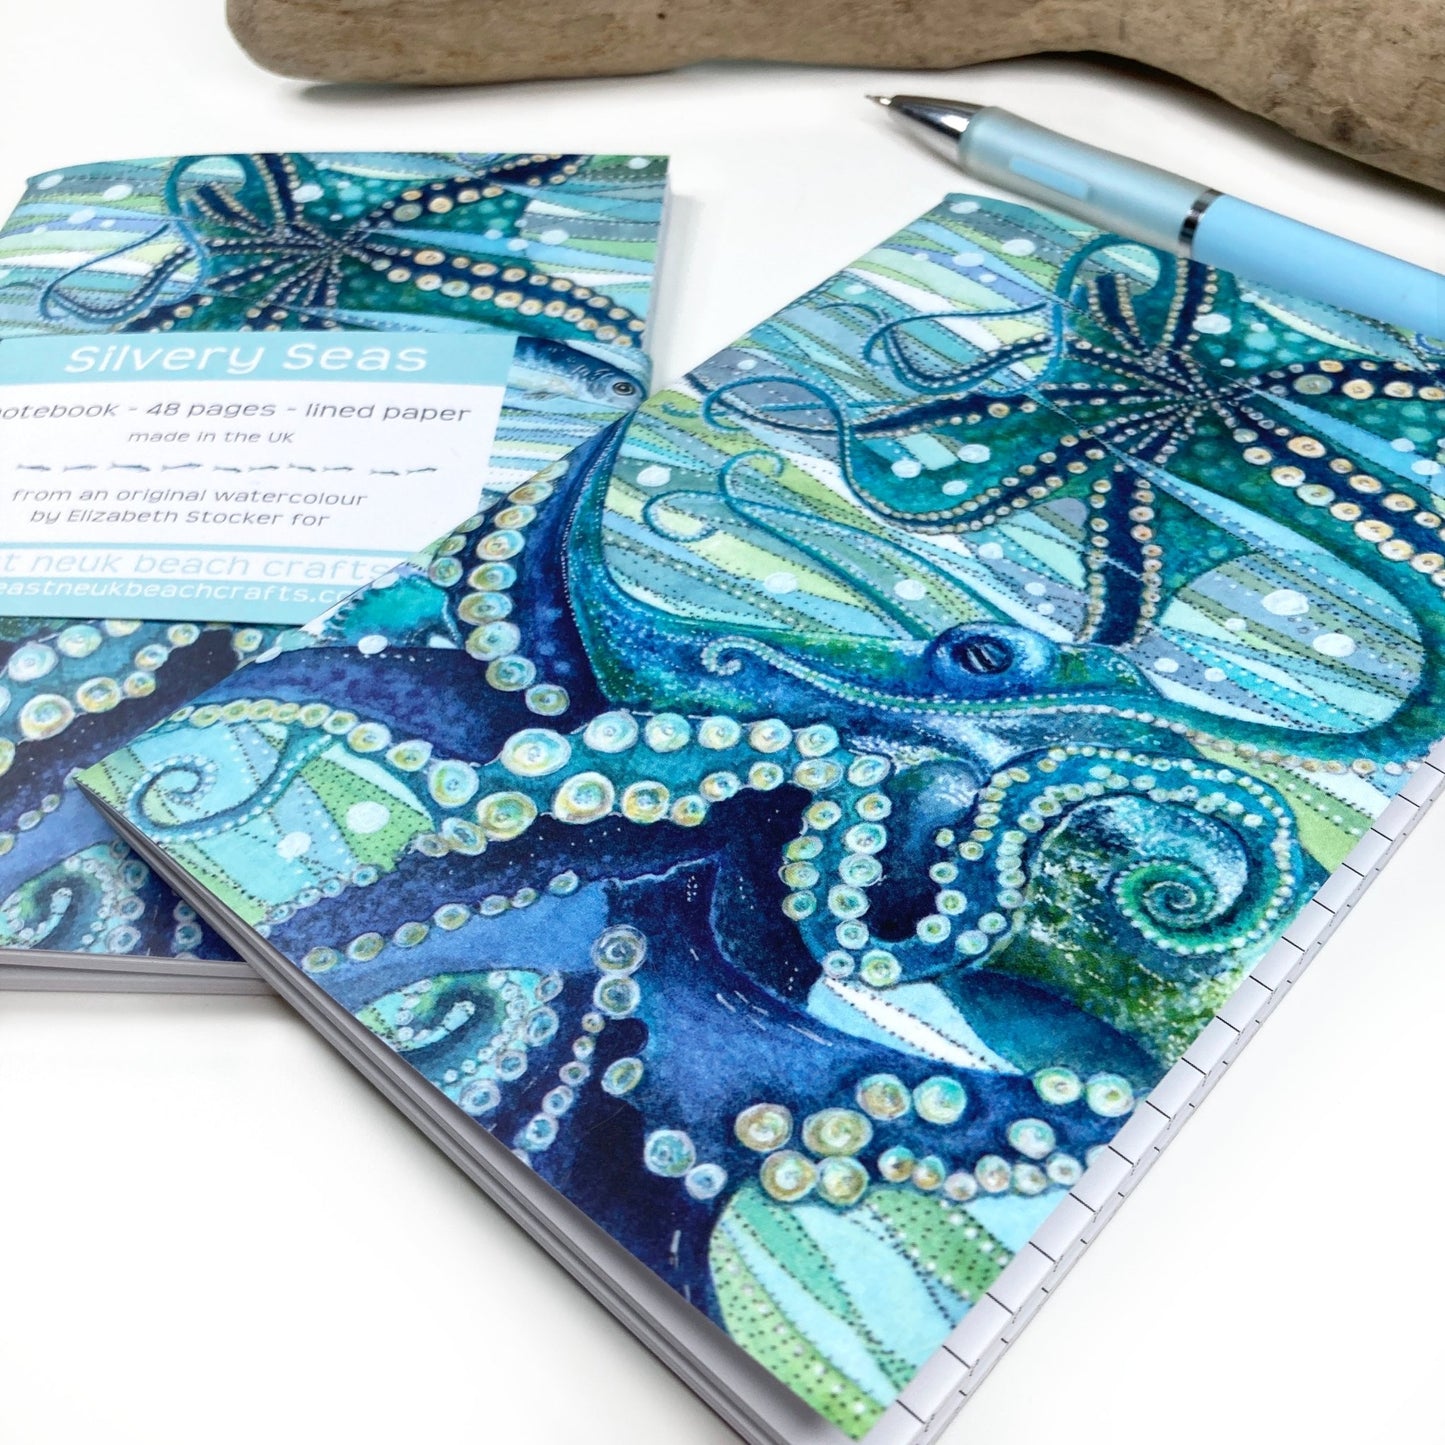 Small Octopus Notebook - A6 Pocket Notepad with Lined Paper - Seaside Stationery - East Neuk Beach Crafts